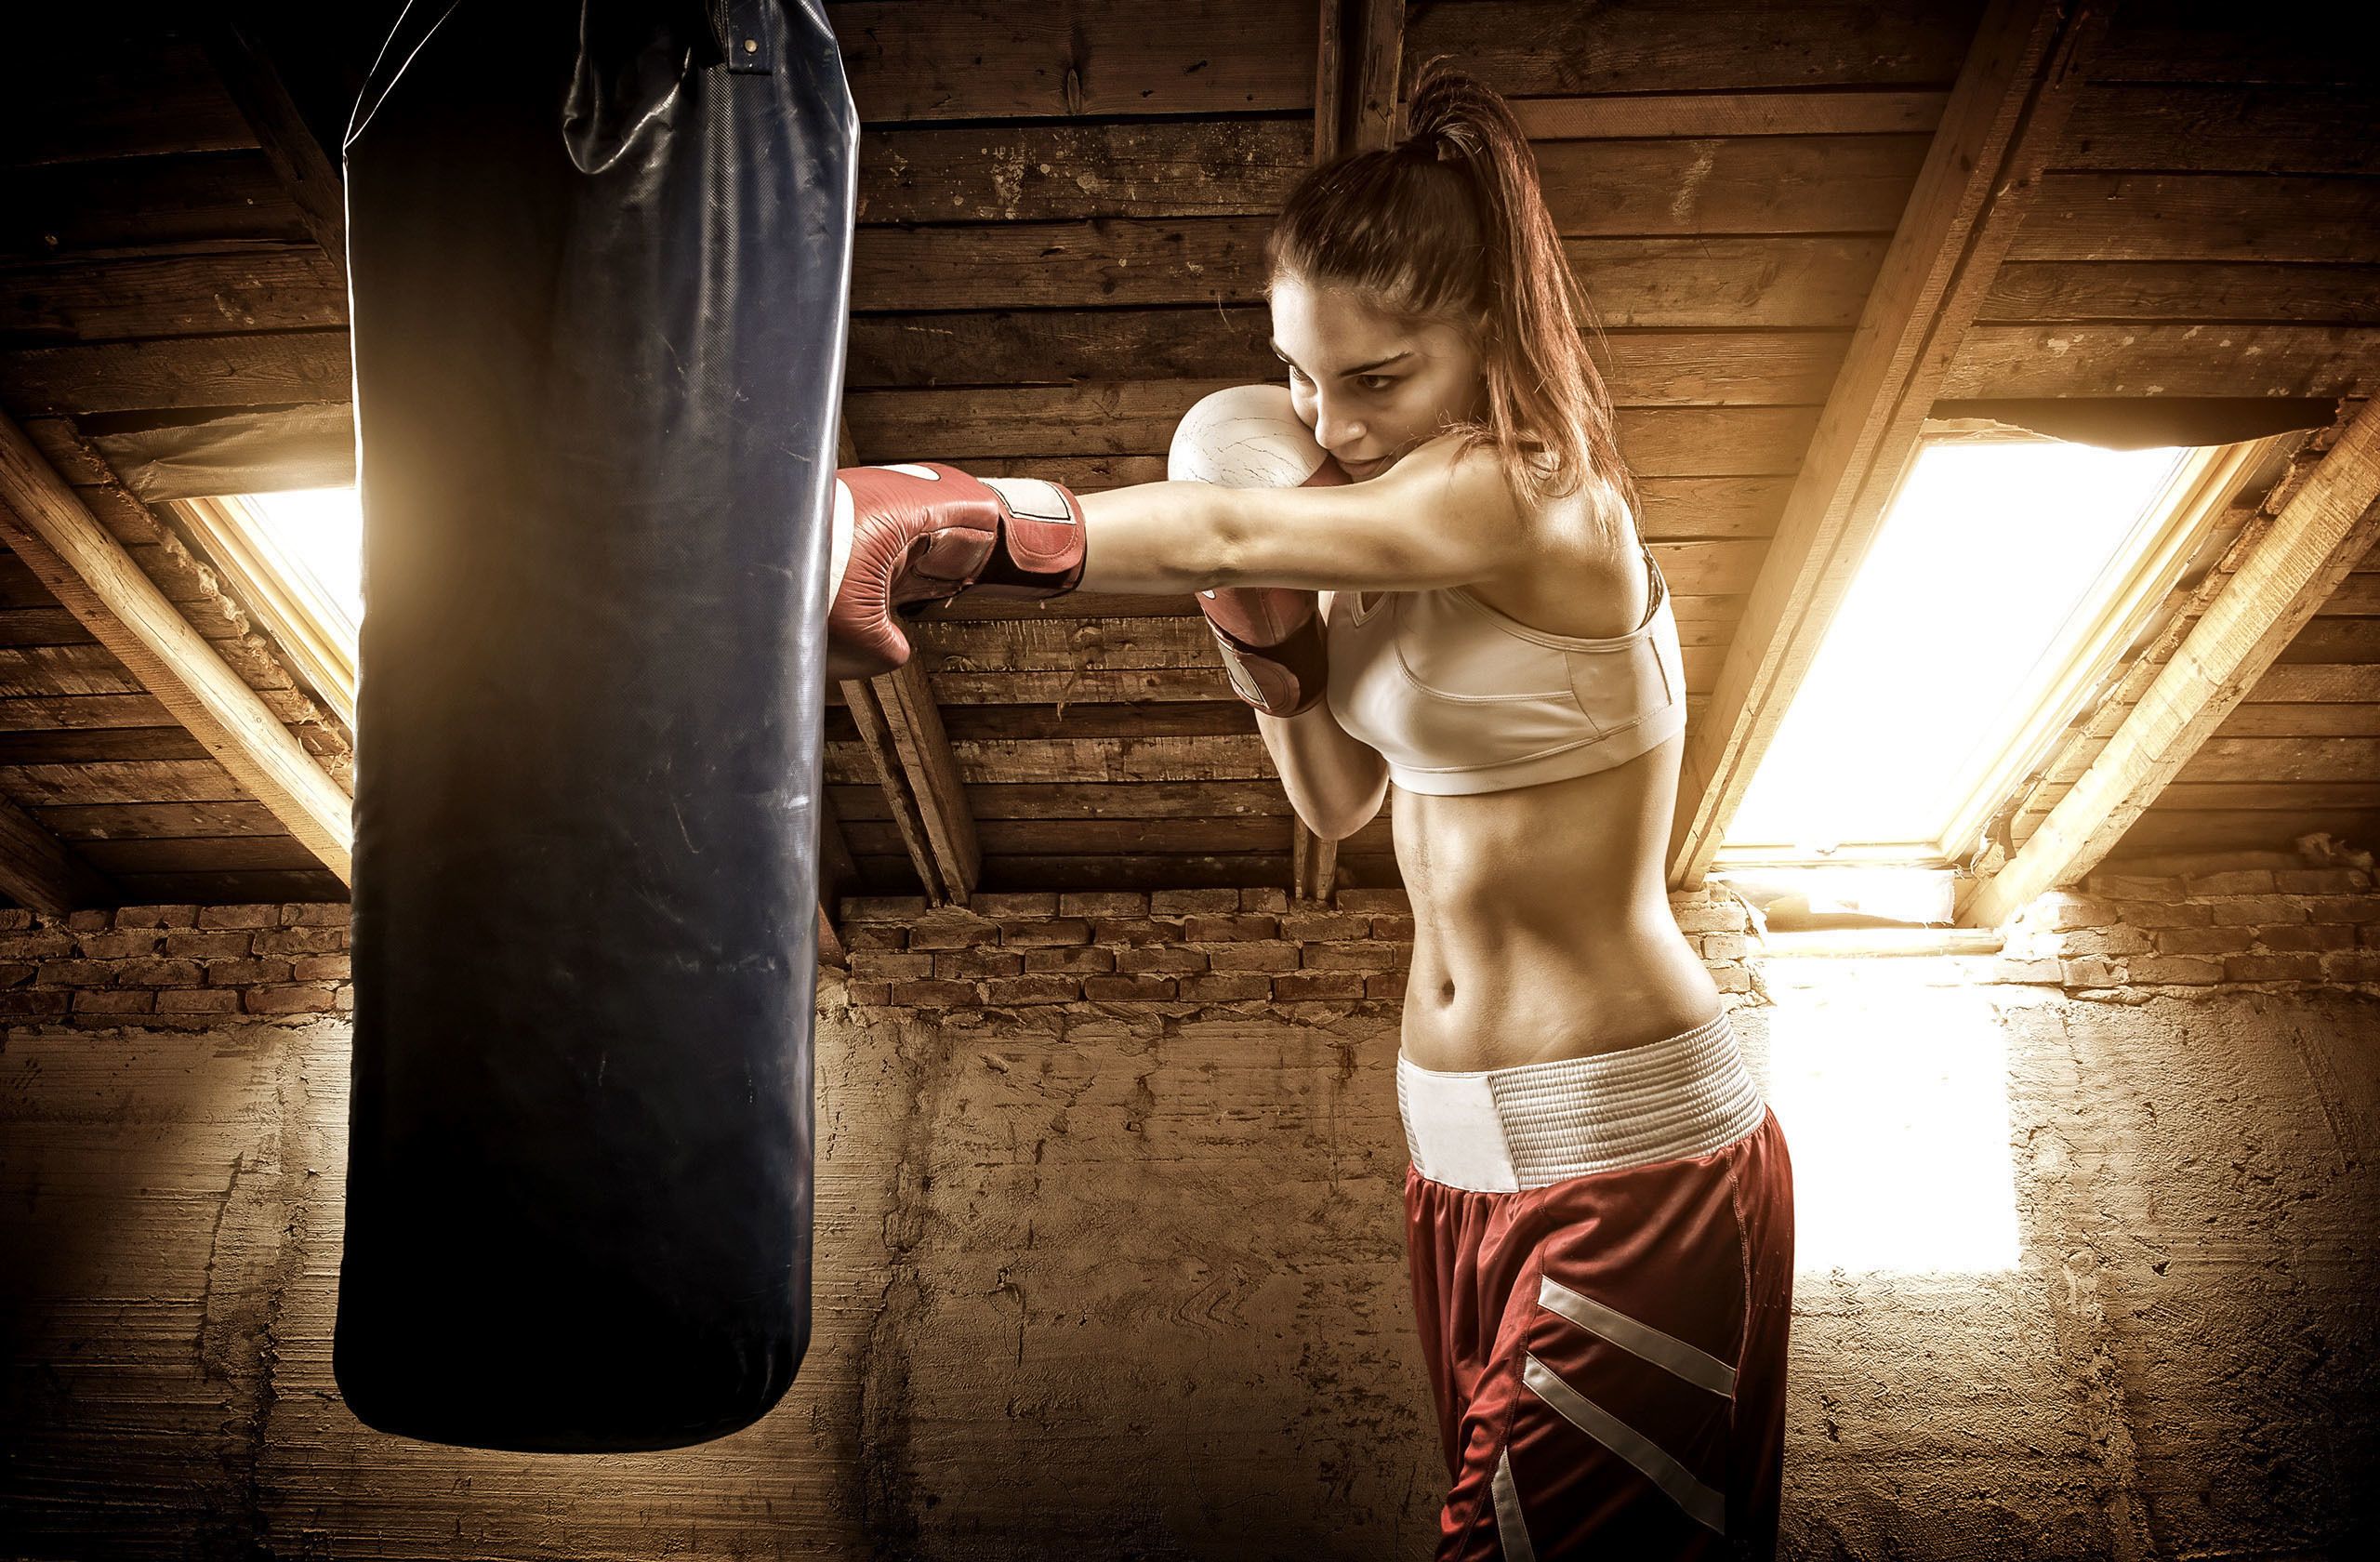 Wallpaper Boxing, Woman, Attic, Workout, Lifestyle / Editor's